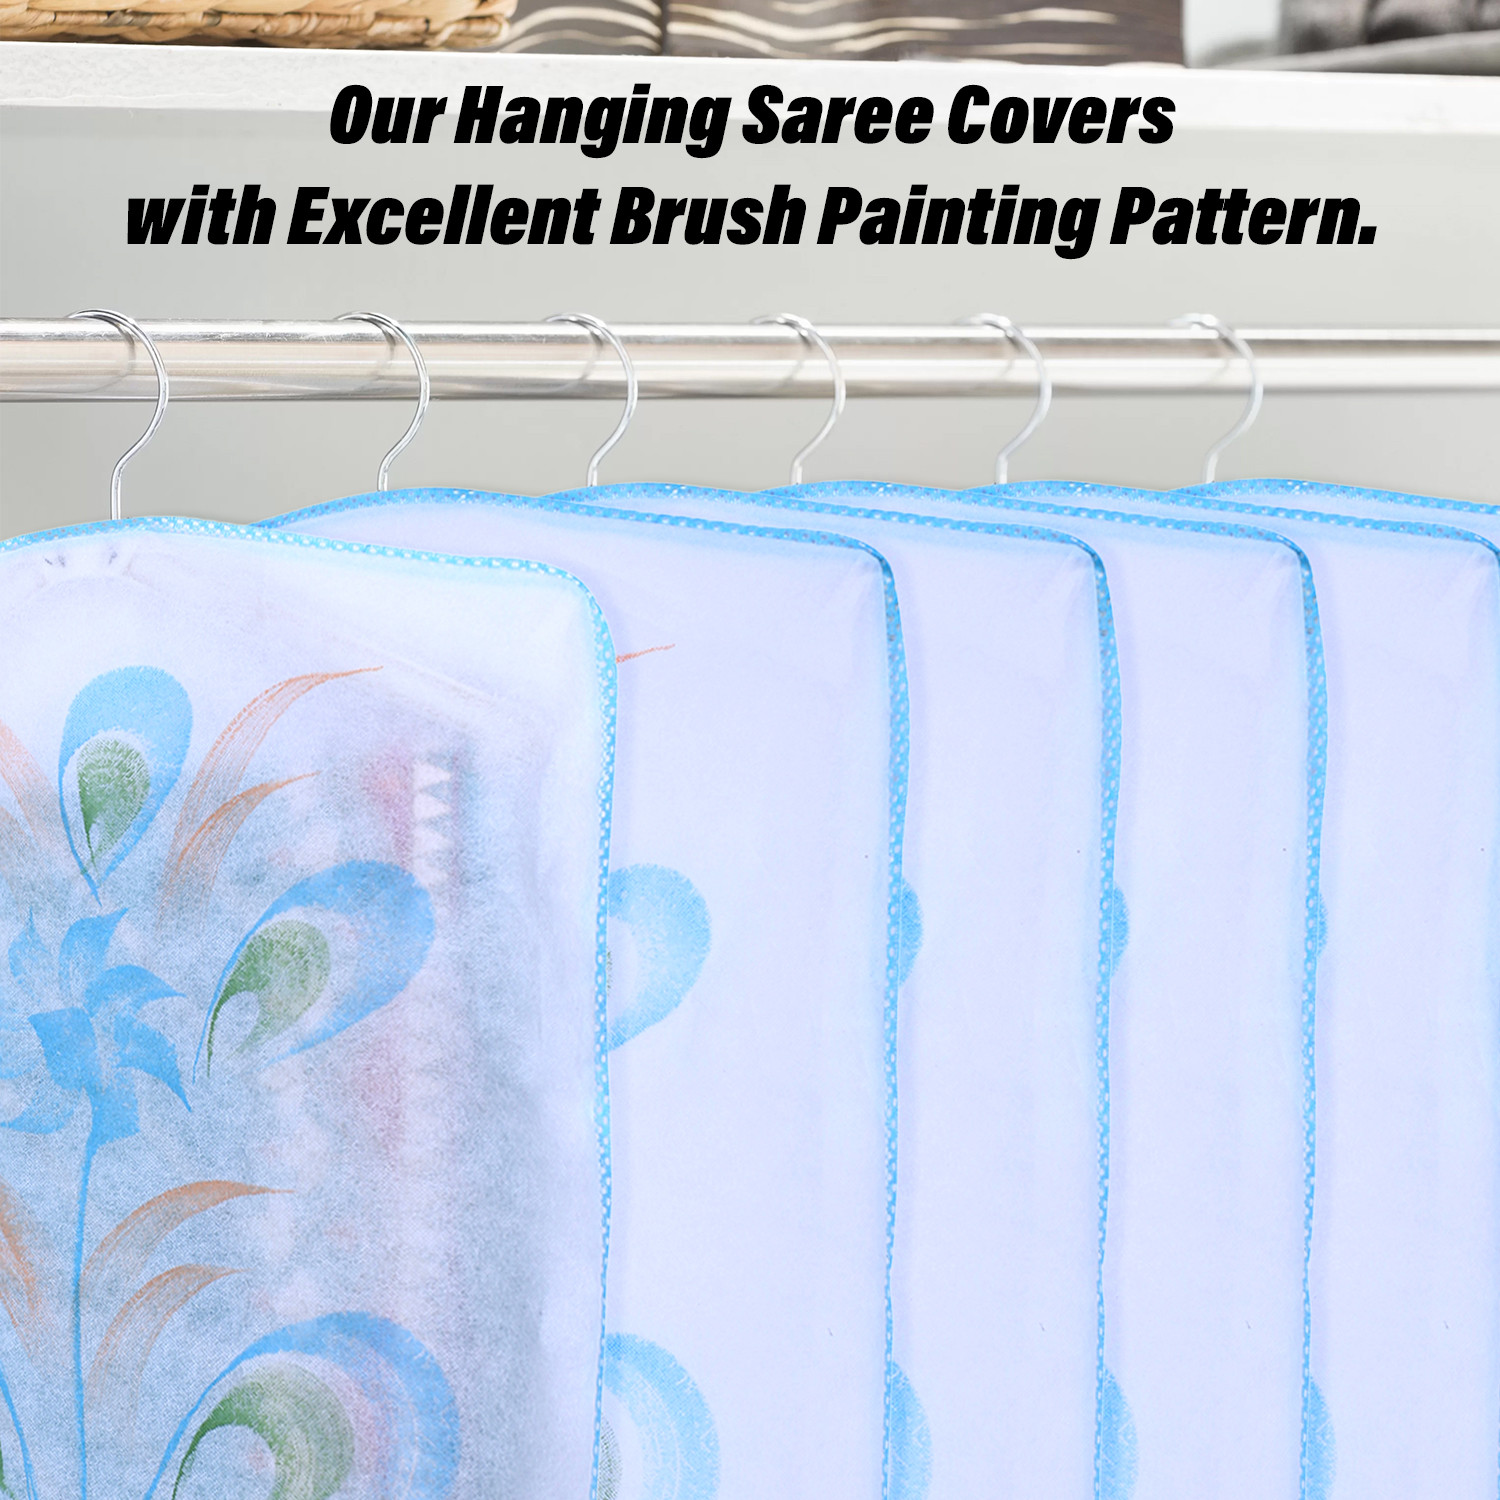 Kuber Industries Hanging Saree Cover | Brush Painting Pattern Saree Cover | Non-Woven Saree Covers for Home | Saree Cover with Small Transparent view |  Sky Blue